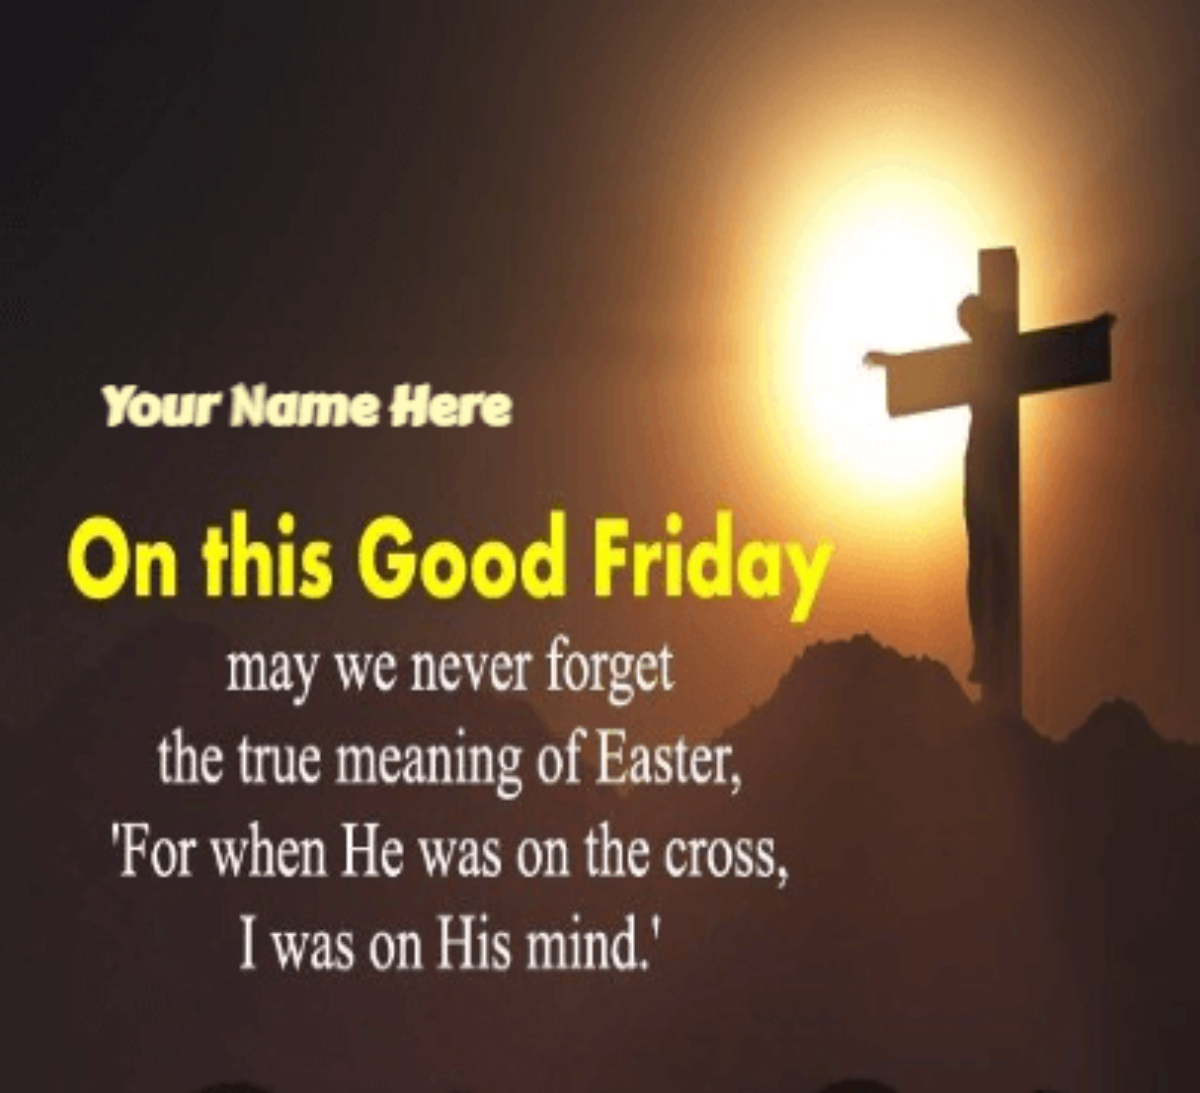 Good friday 2021 - Good Friday Wishes and Images With Name